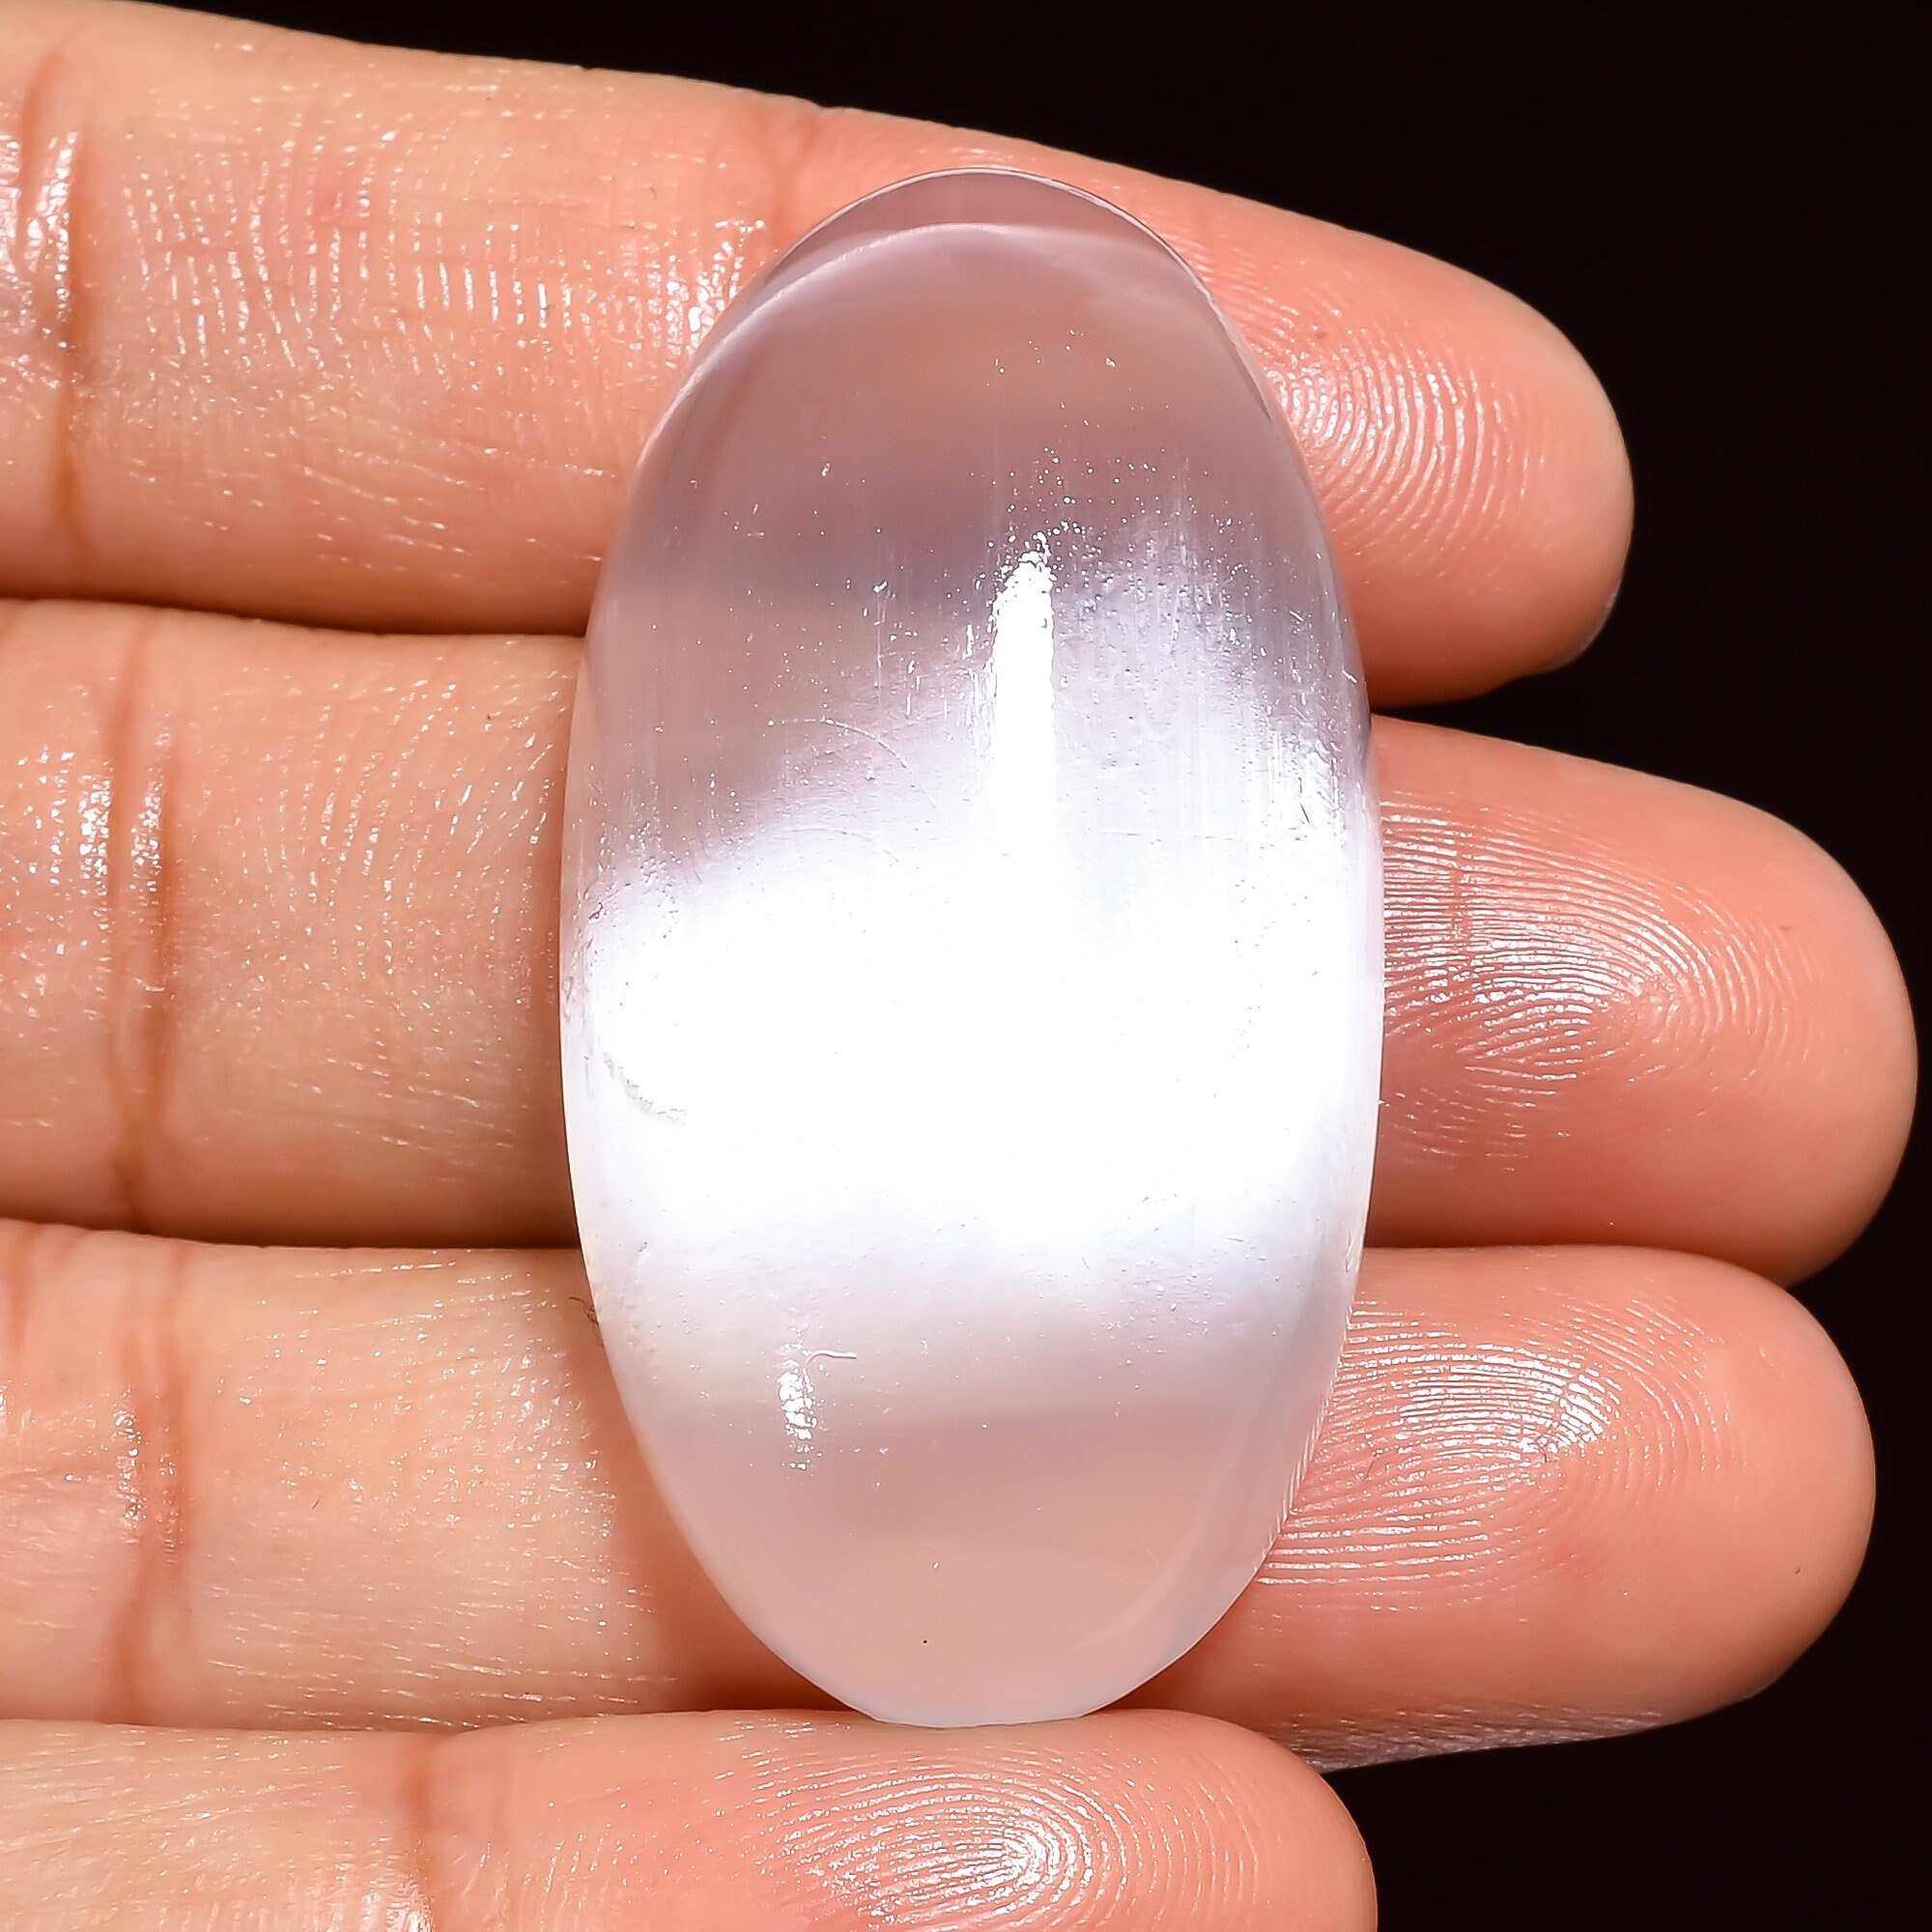 Top Quality Selenite Cabs Size 39X20X10 mm S-10116 100% Natural Selenite Gemstone Oval Shape Loose Gemstone 55 Ct Selenite Cabochon